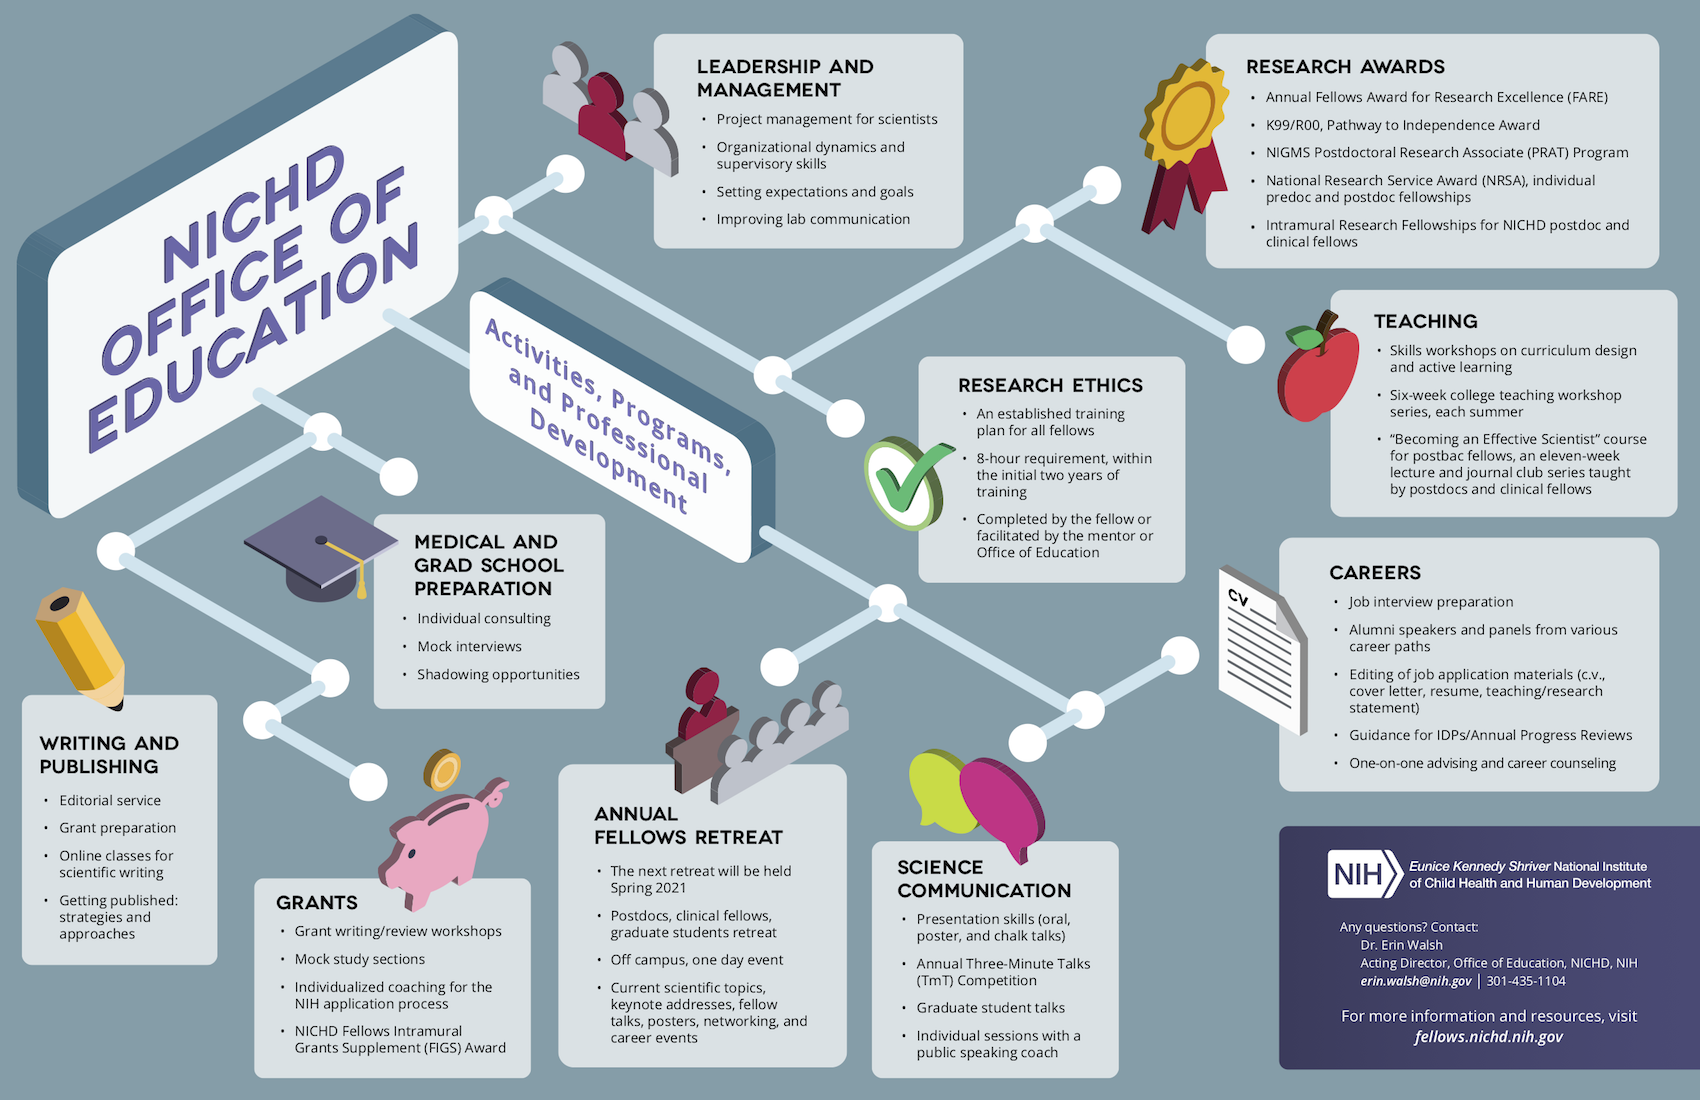 Infographic depicting the activities of the Office of Education, including: leadership and management; research awards; teaching; research ethics; careers; medical and grad school preparation; writing and publishing; grants; annual fellows retreat; and science communication.